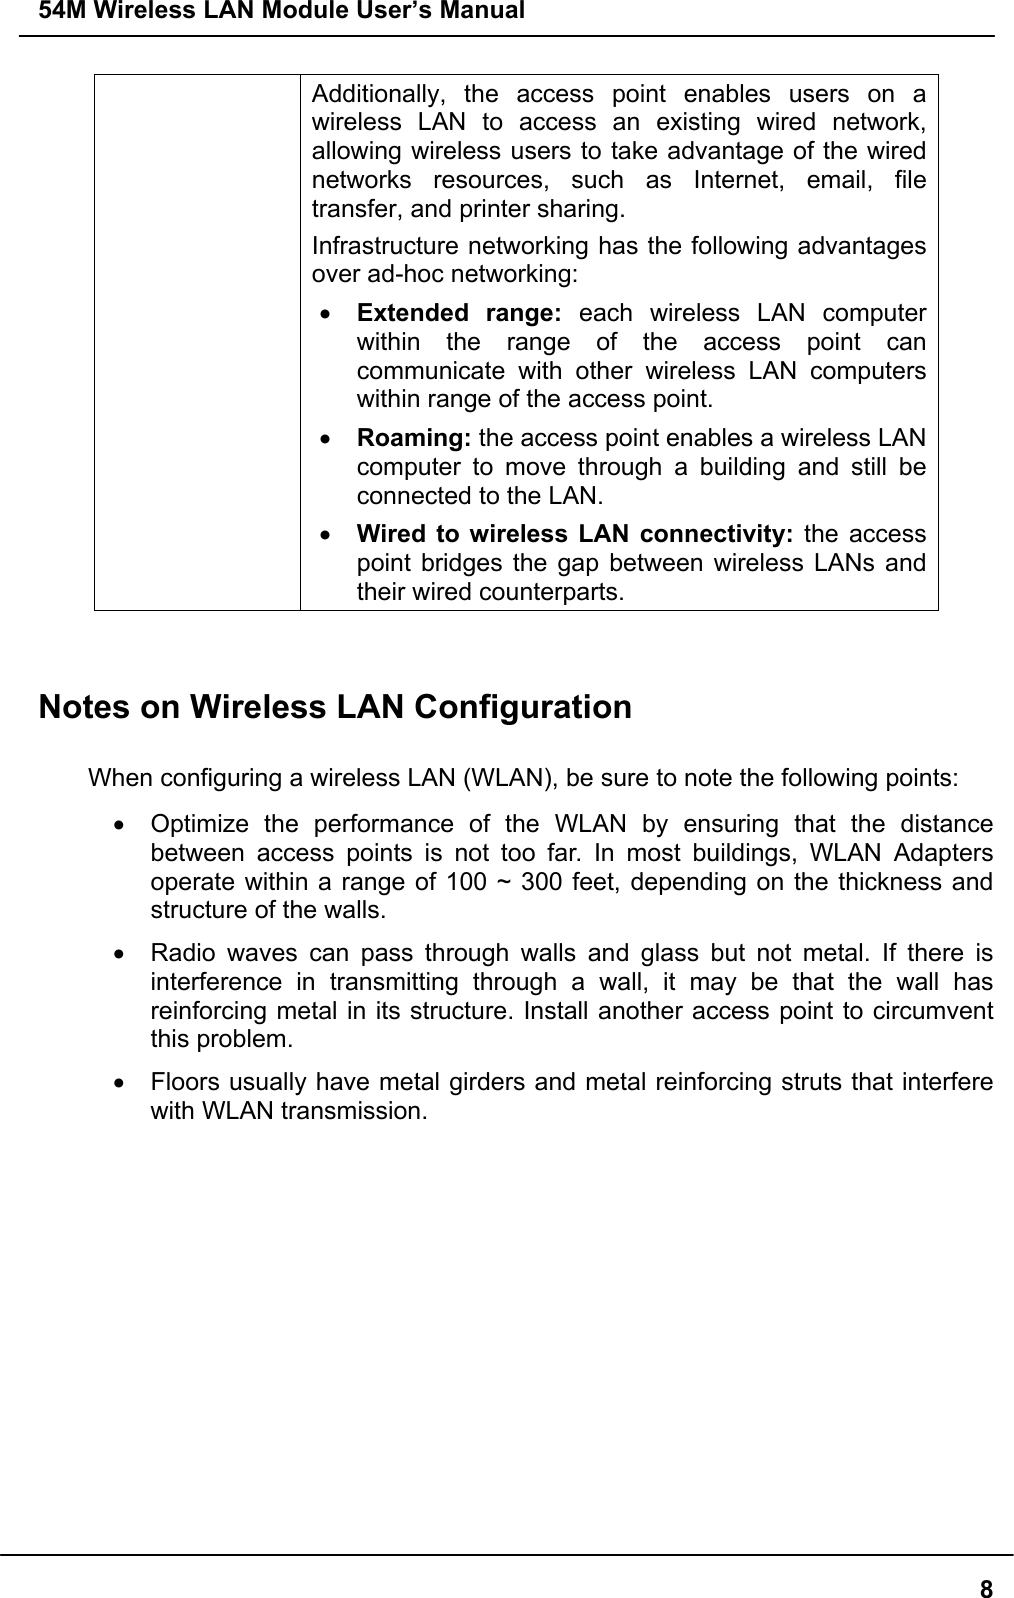 54M Wireless LAN Module User’s Manual8Additionally, the access point enables users on awireless LAN to access an existing wired network,allowing wireless users to take advantage of the wirednetworks resources, such as Internet, email, filetransfer, and printer sharing.Infrastructure networking has the following advantagesover ad-hoc networking:• Extended range: each wireless LAN computerwithin the range of the access point cancommunicate with other wireless LAN computerswithin range of the access point.• Roaming: the access point enables a wireless LANcomputer to move through a building and still beconnected to the LAN.• Wired to wireless LAN connectivity: the accesspoint bridges the gap between wireless LANs andtheir wired counterparts.Notes on Wireless LAN ConfigurationWhen configuring a wireless LAN (WLAN), be sure to note the following points:•  Optimize the performance of the WLAN by ensuring that the distancebetween access points is not too far. In most buildings, WLAN Adaptersoperate within a range of 100 ~ 300 feet, depending on the thickness andstructure of the walls.•  Radio waves can pass through walls and glass but not metal. If there isinterference in transmitting through a wall, it may be that the wall hasreinforcing metal in its structure. Install another access point to circumventthis problem.•  Floors usually have metal girders and metal reinforcing struts that interferewith WLAN transmission.